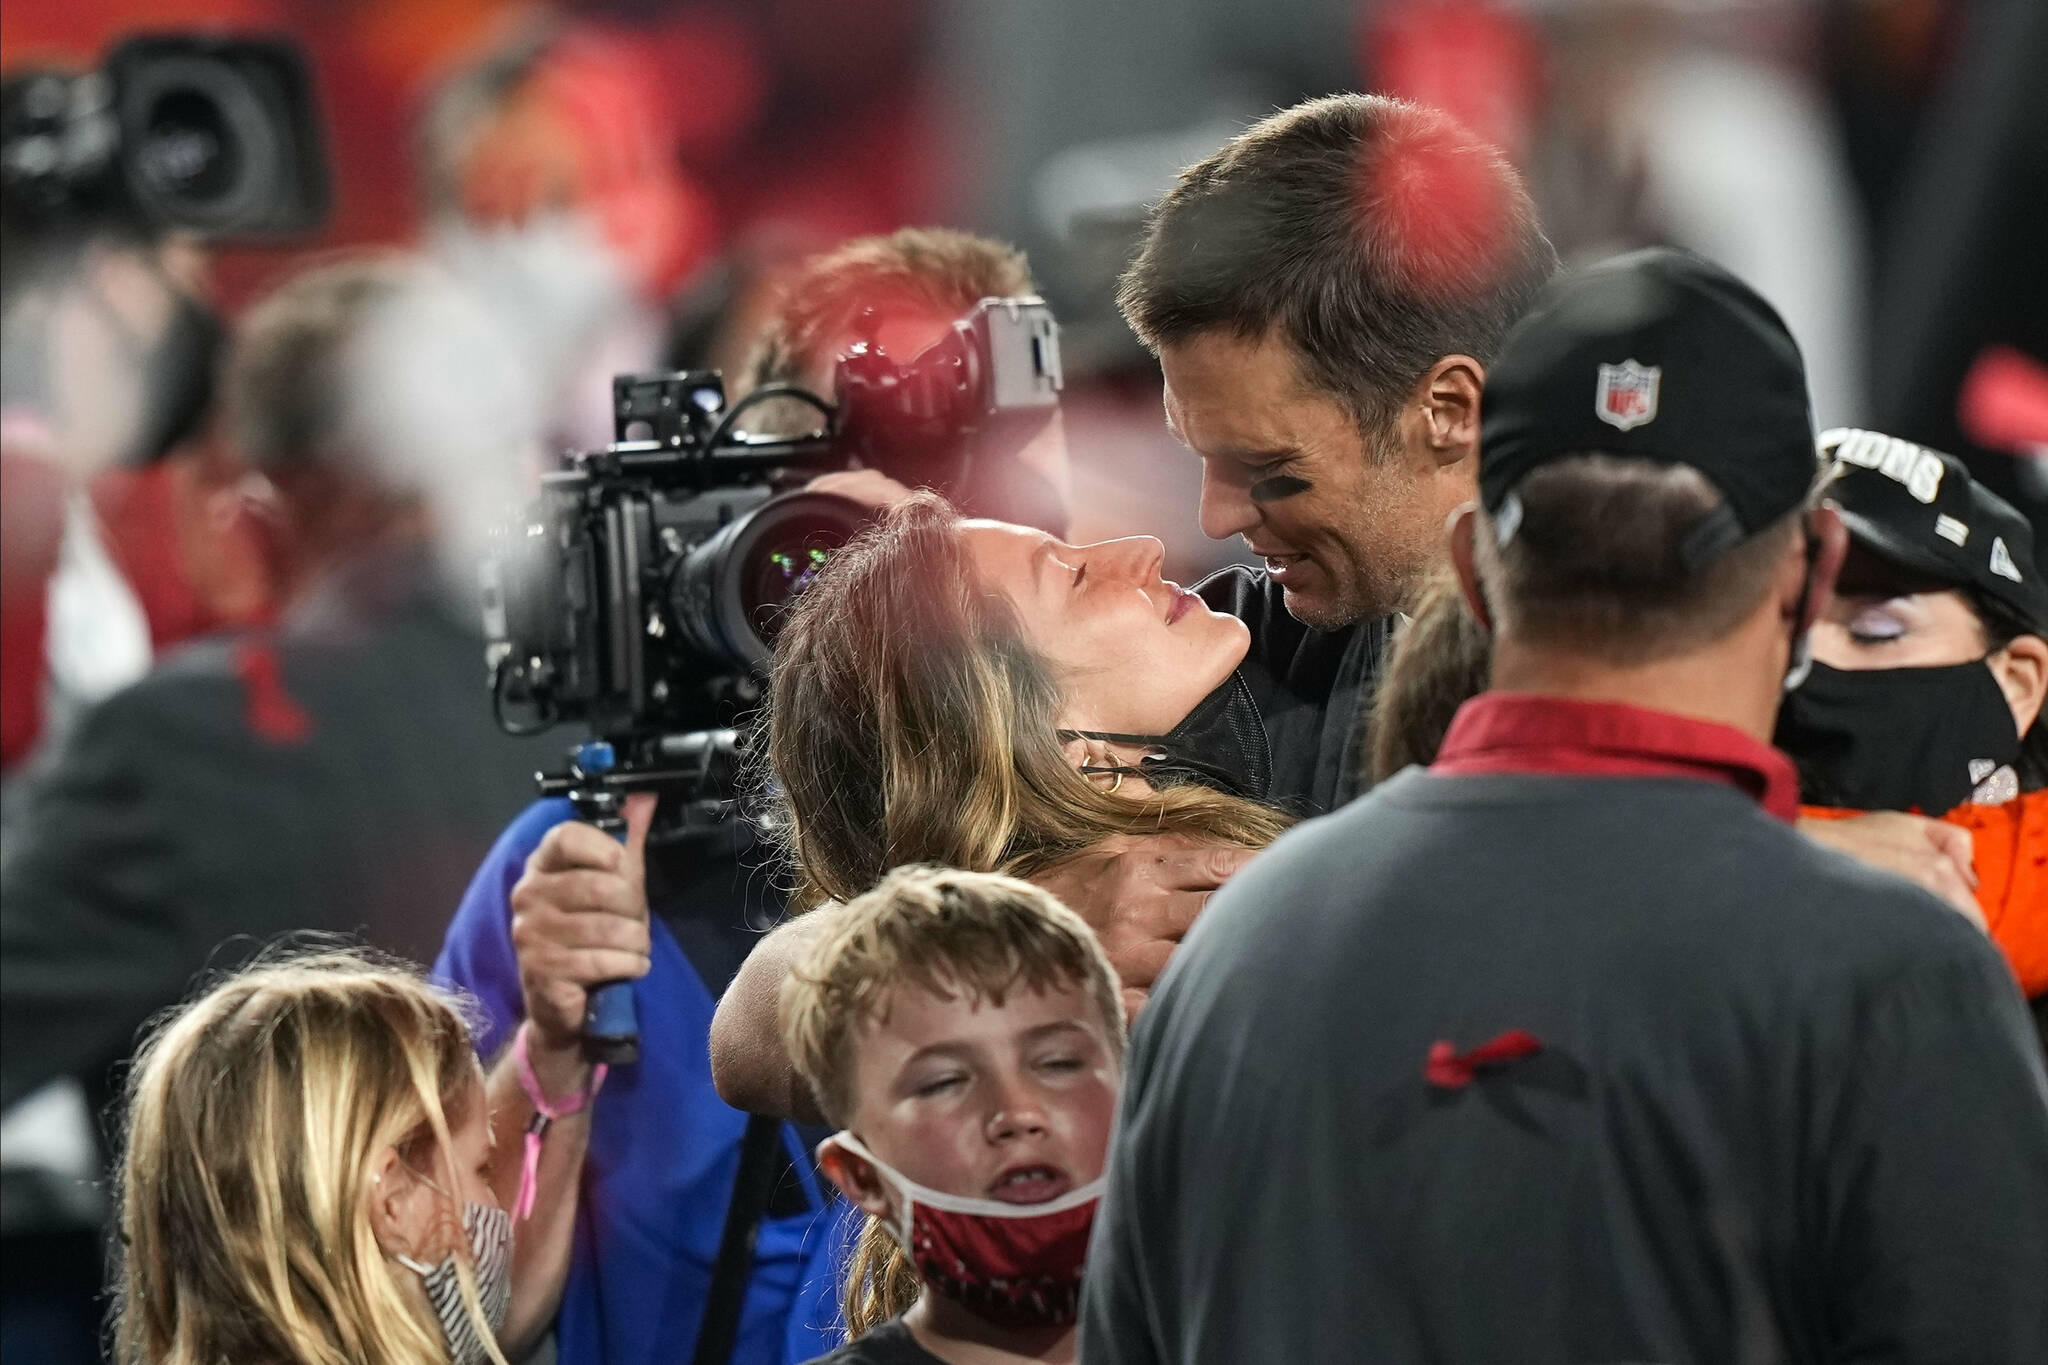 Tampa Bay Buccaneers quarterback Tom Brady celebrates with his wife Gisele Bundchen and children after the NFL Super Bowl 55 football game against the Kansas City Chiefs, Sunday, Feb. 7, 2021, in Tampa, Fla. The Buccaneers defeated the Chiefs 31-9 to win the Super Bowl. (AP Photo/David J. Phillip)